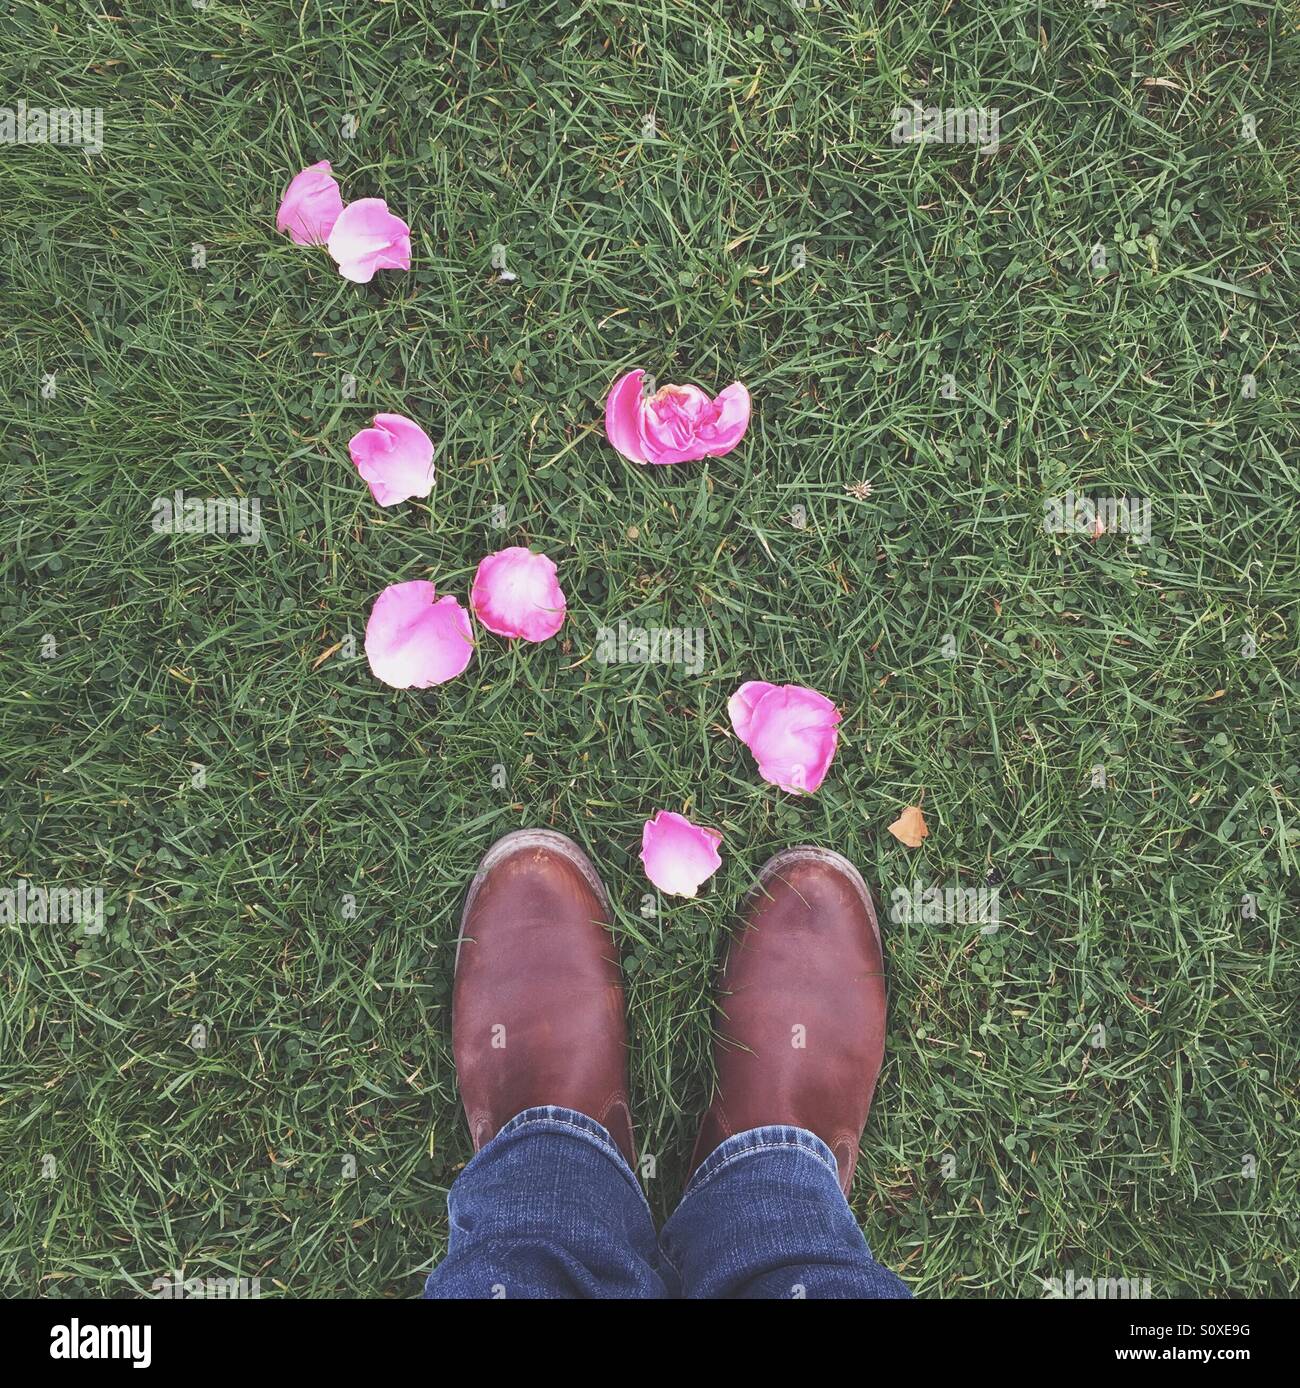 Lady with rose petals Stock Photo